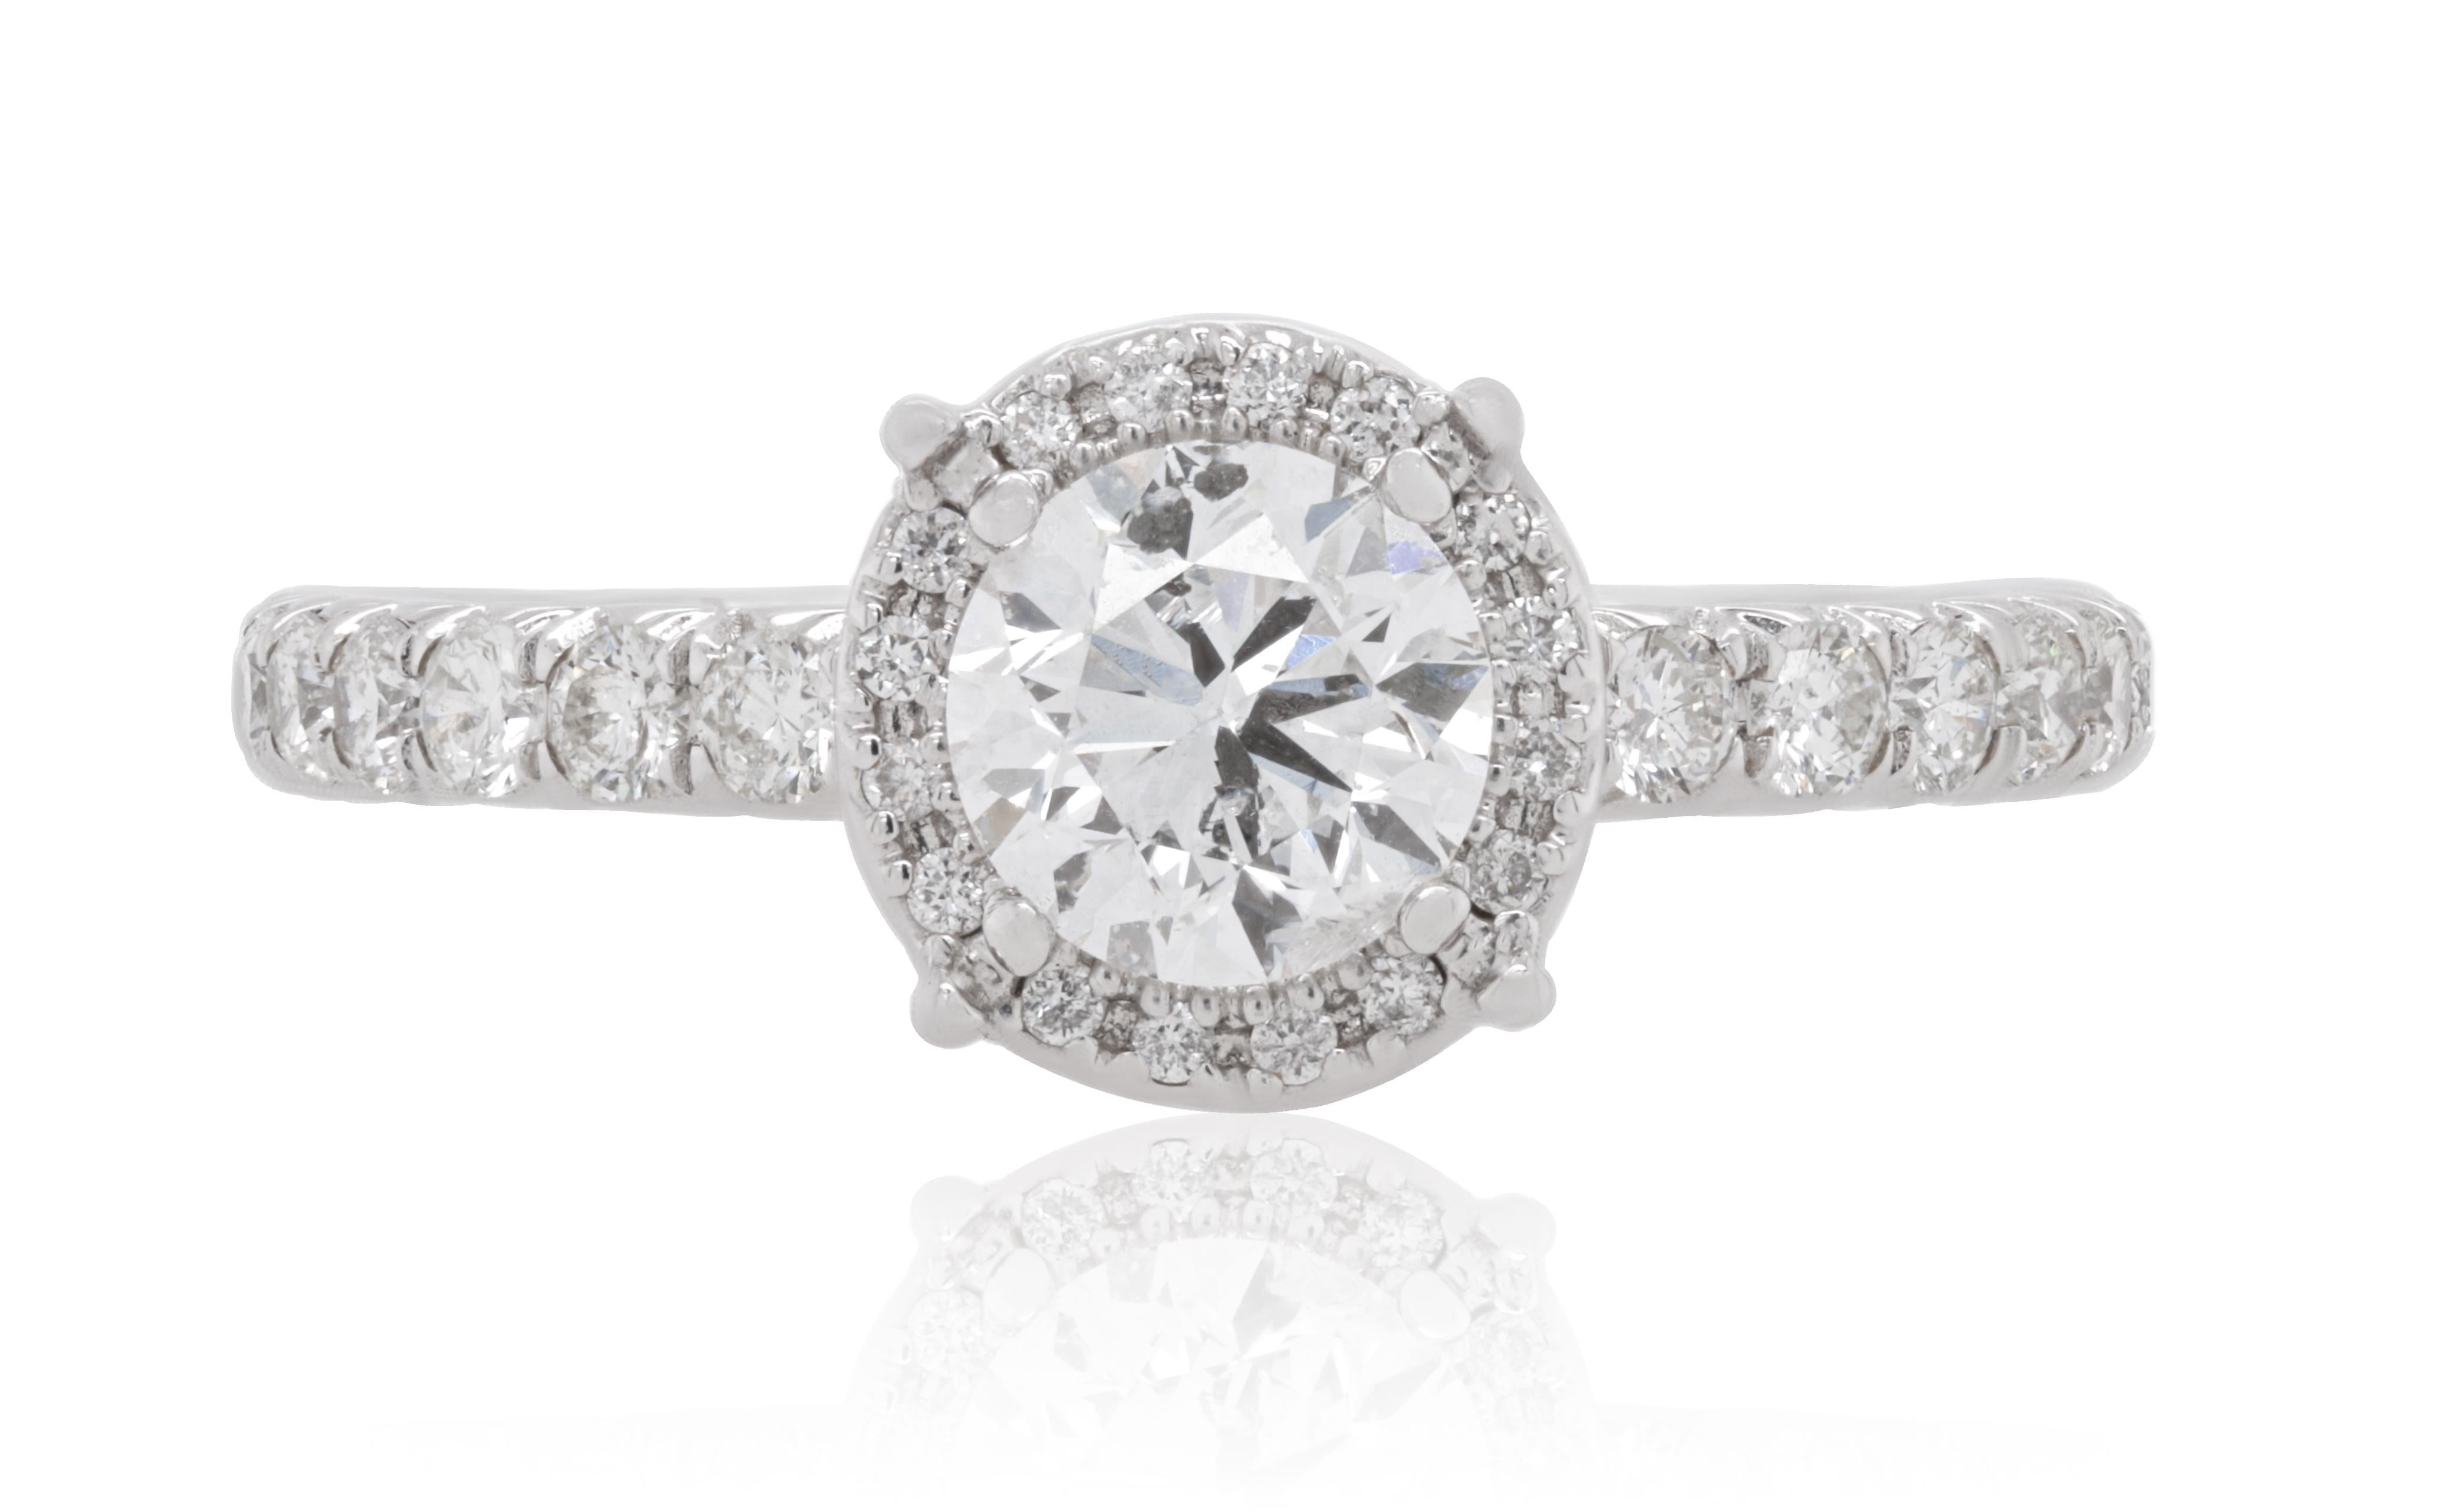 14ktwg ring center ctone 0,70cts and 0.50cts around diamonds
